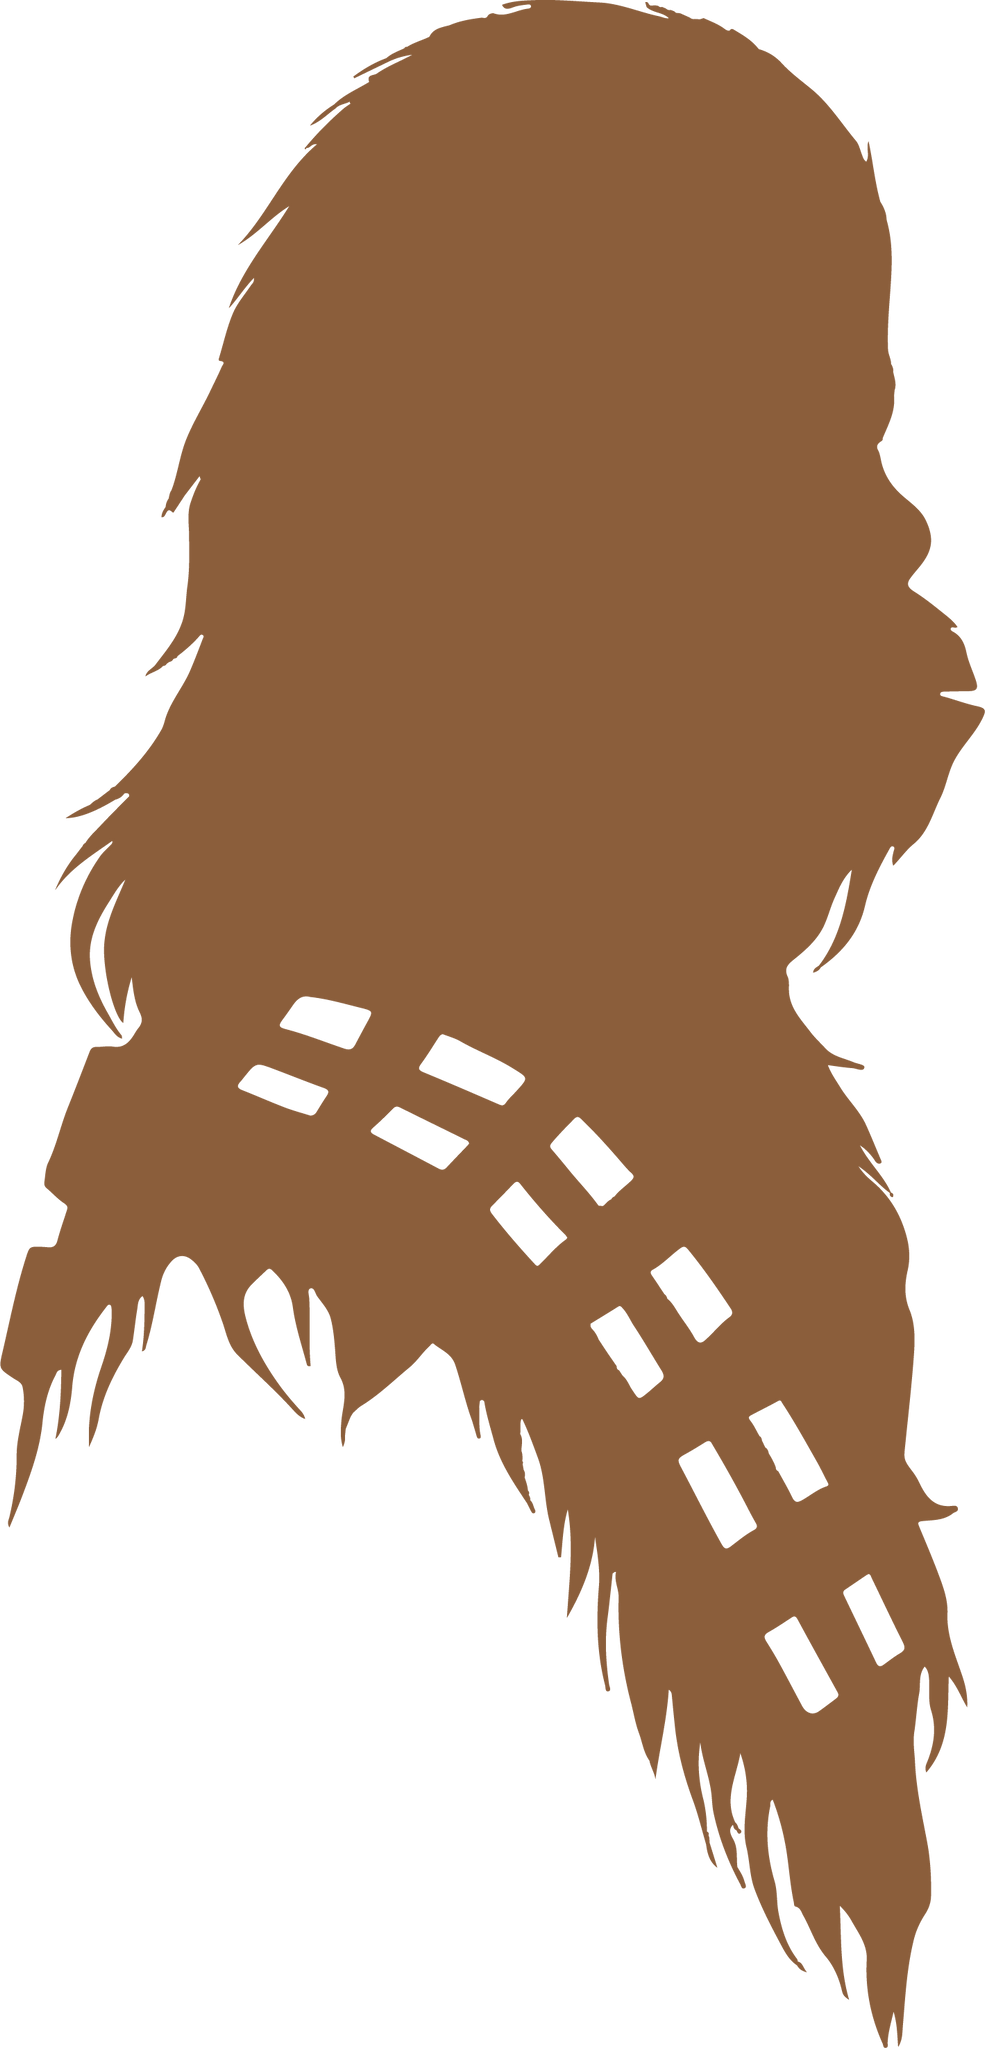 Download Chewbacca Silhouette | Star Wars SVG DXF EPS PNG Cut File ...